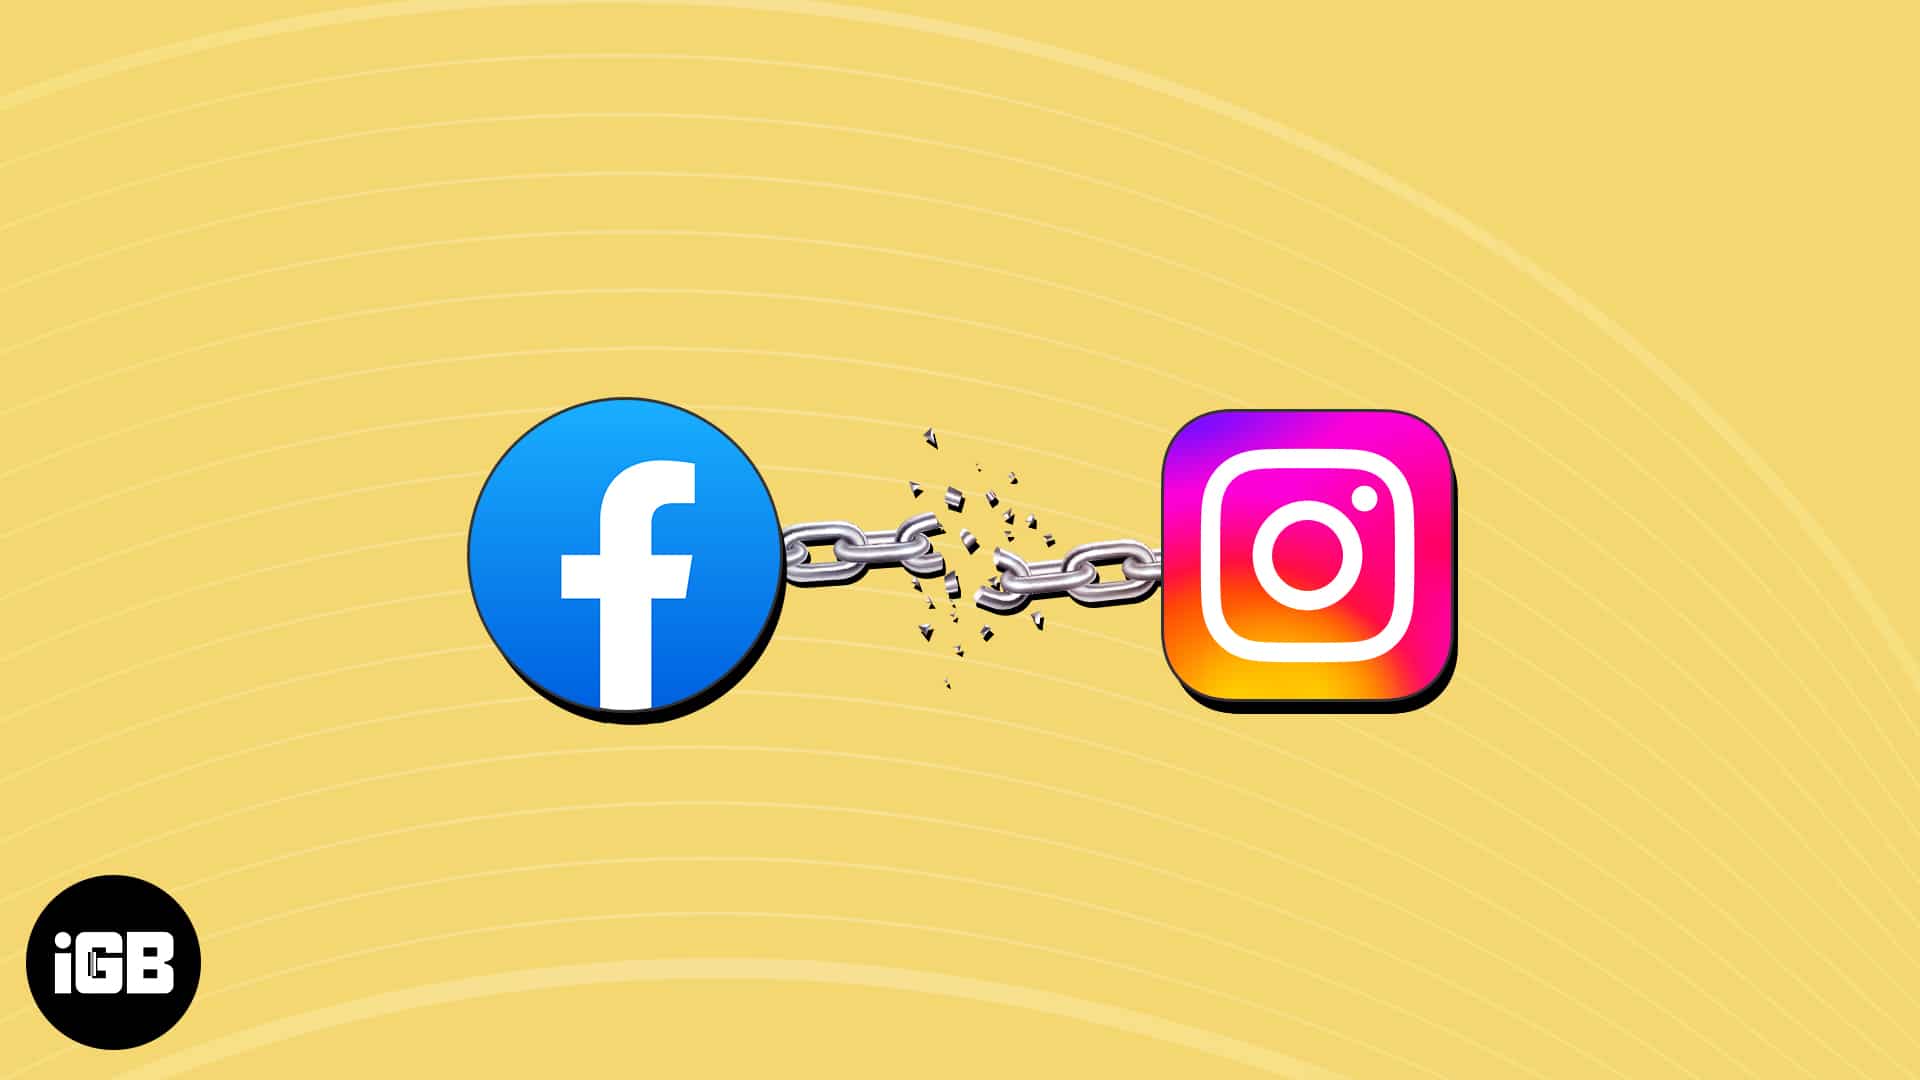 Review your privacy settings on both platforms to allow Instagram sharing on Facebook
Reinstall the Instagram app on your device